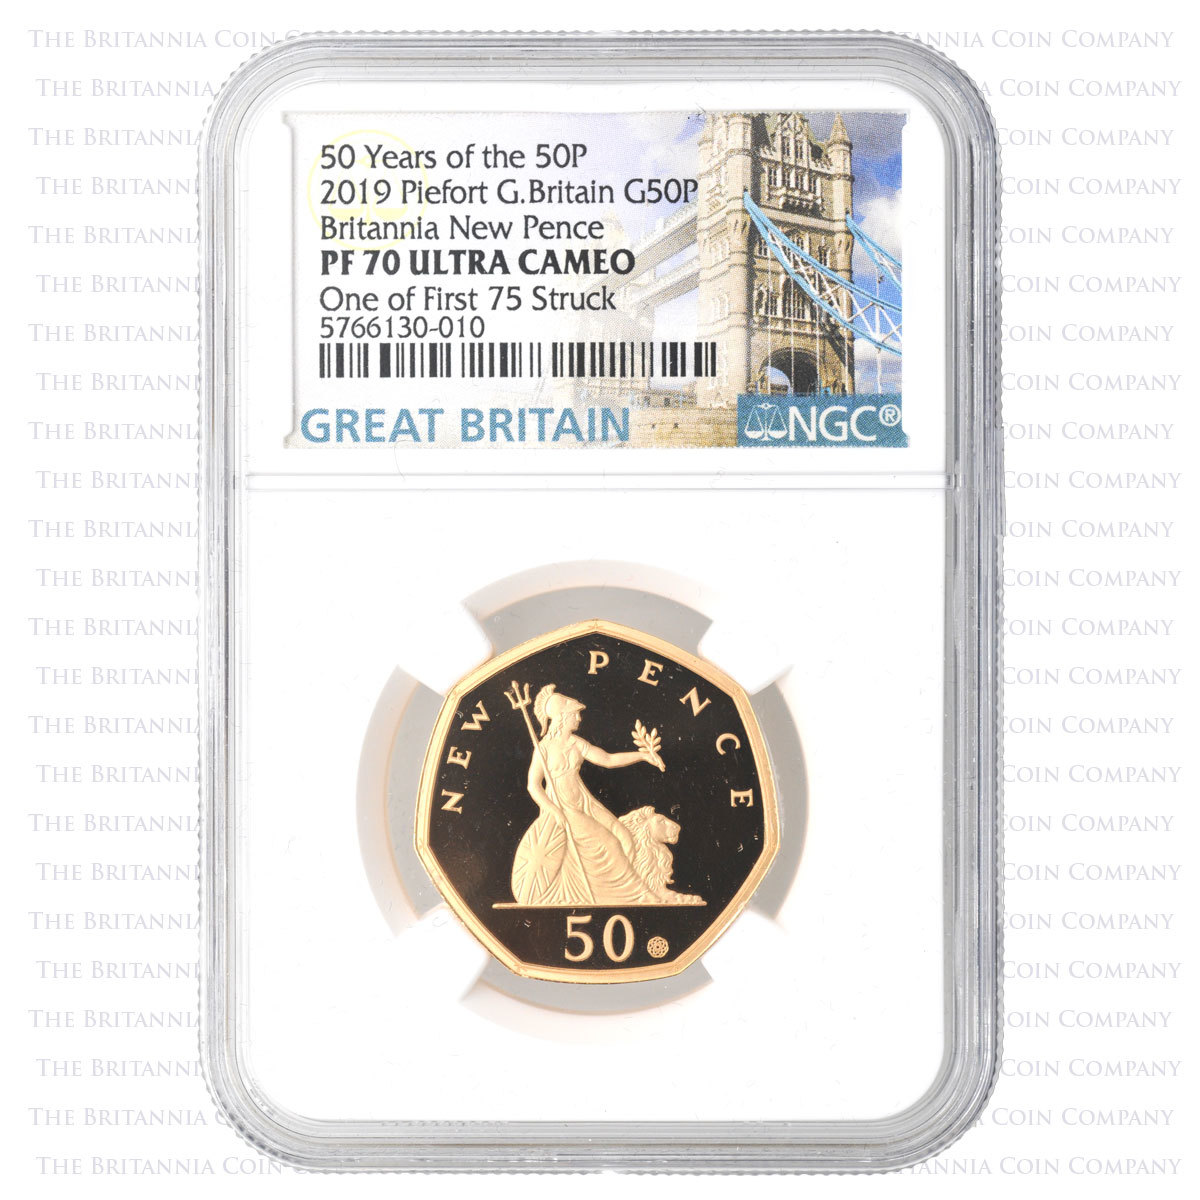 50 Years of the 50p : 2019 Piedfort PF70 Ultra Cameo Reverse